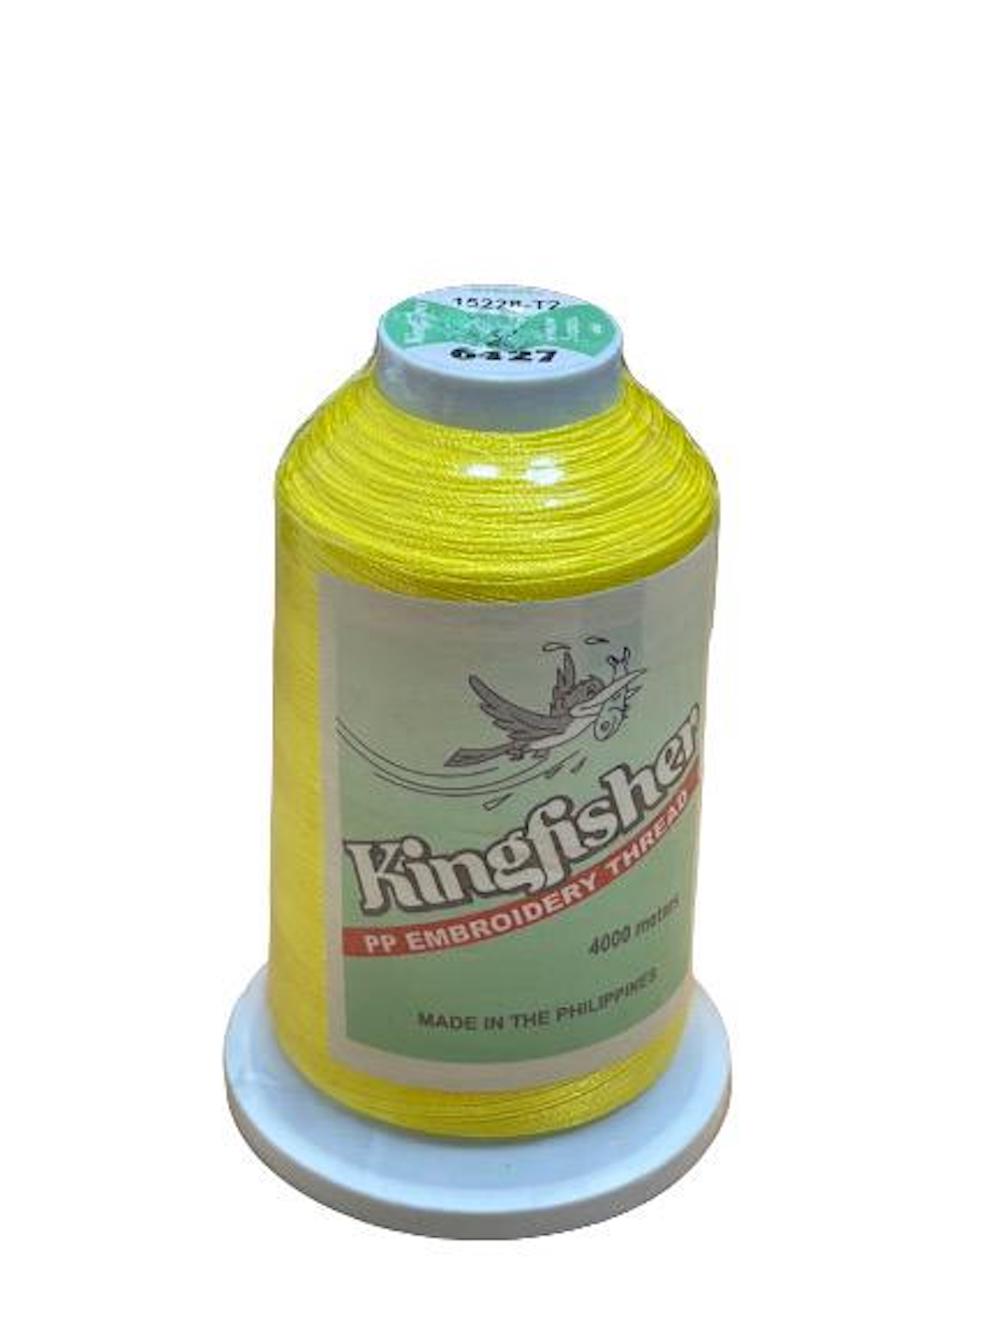 King Fisher Embroidery Thread 4000m 6427 - MY SEWING MALL